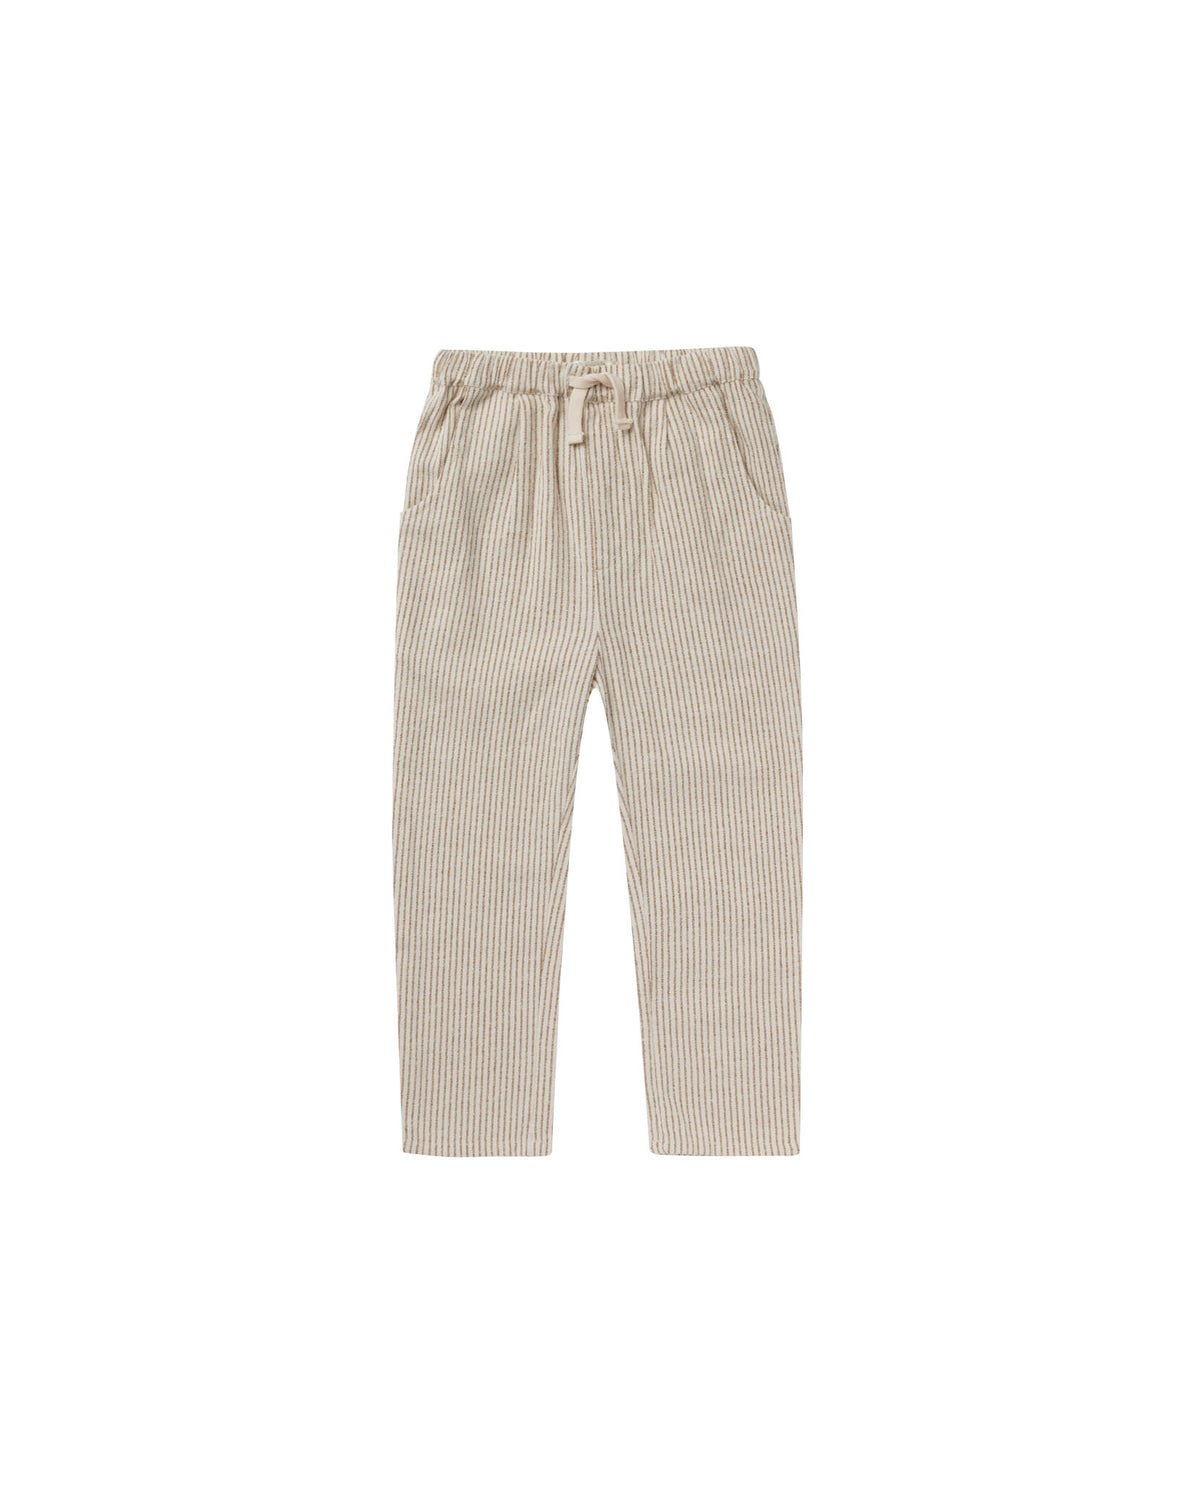 Ethan Trousers - Brass Pinstripe - Child Boutique